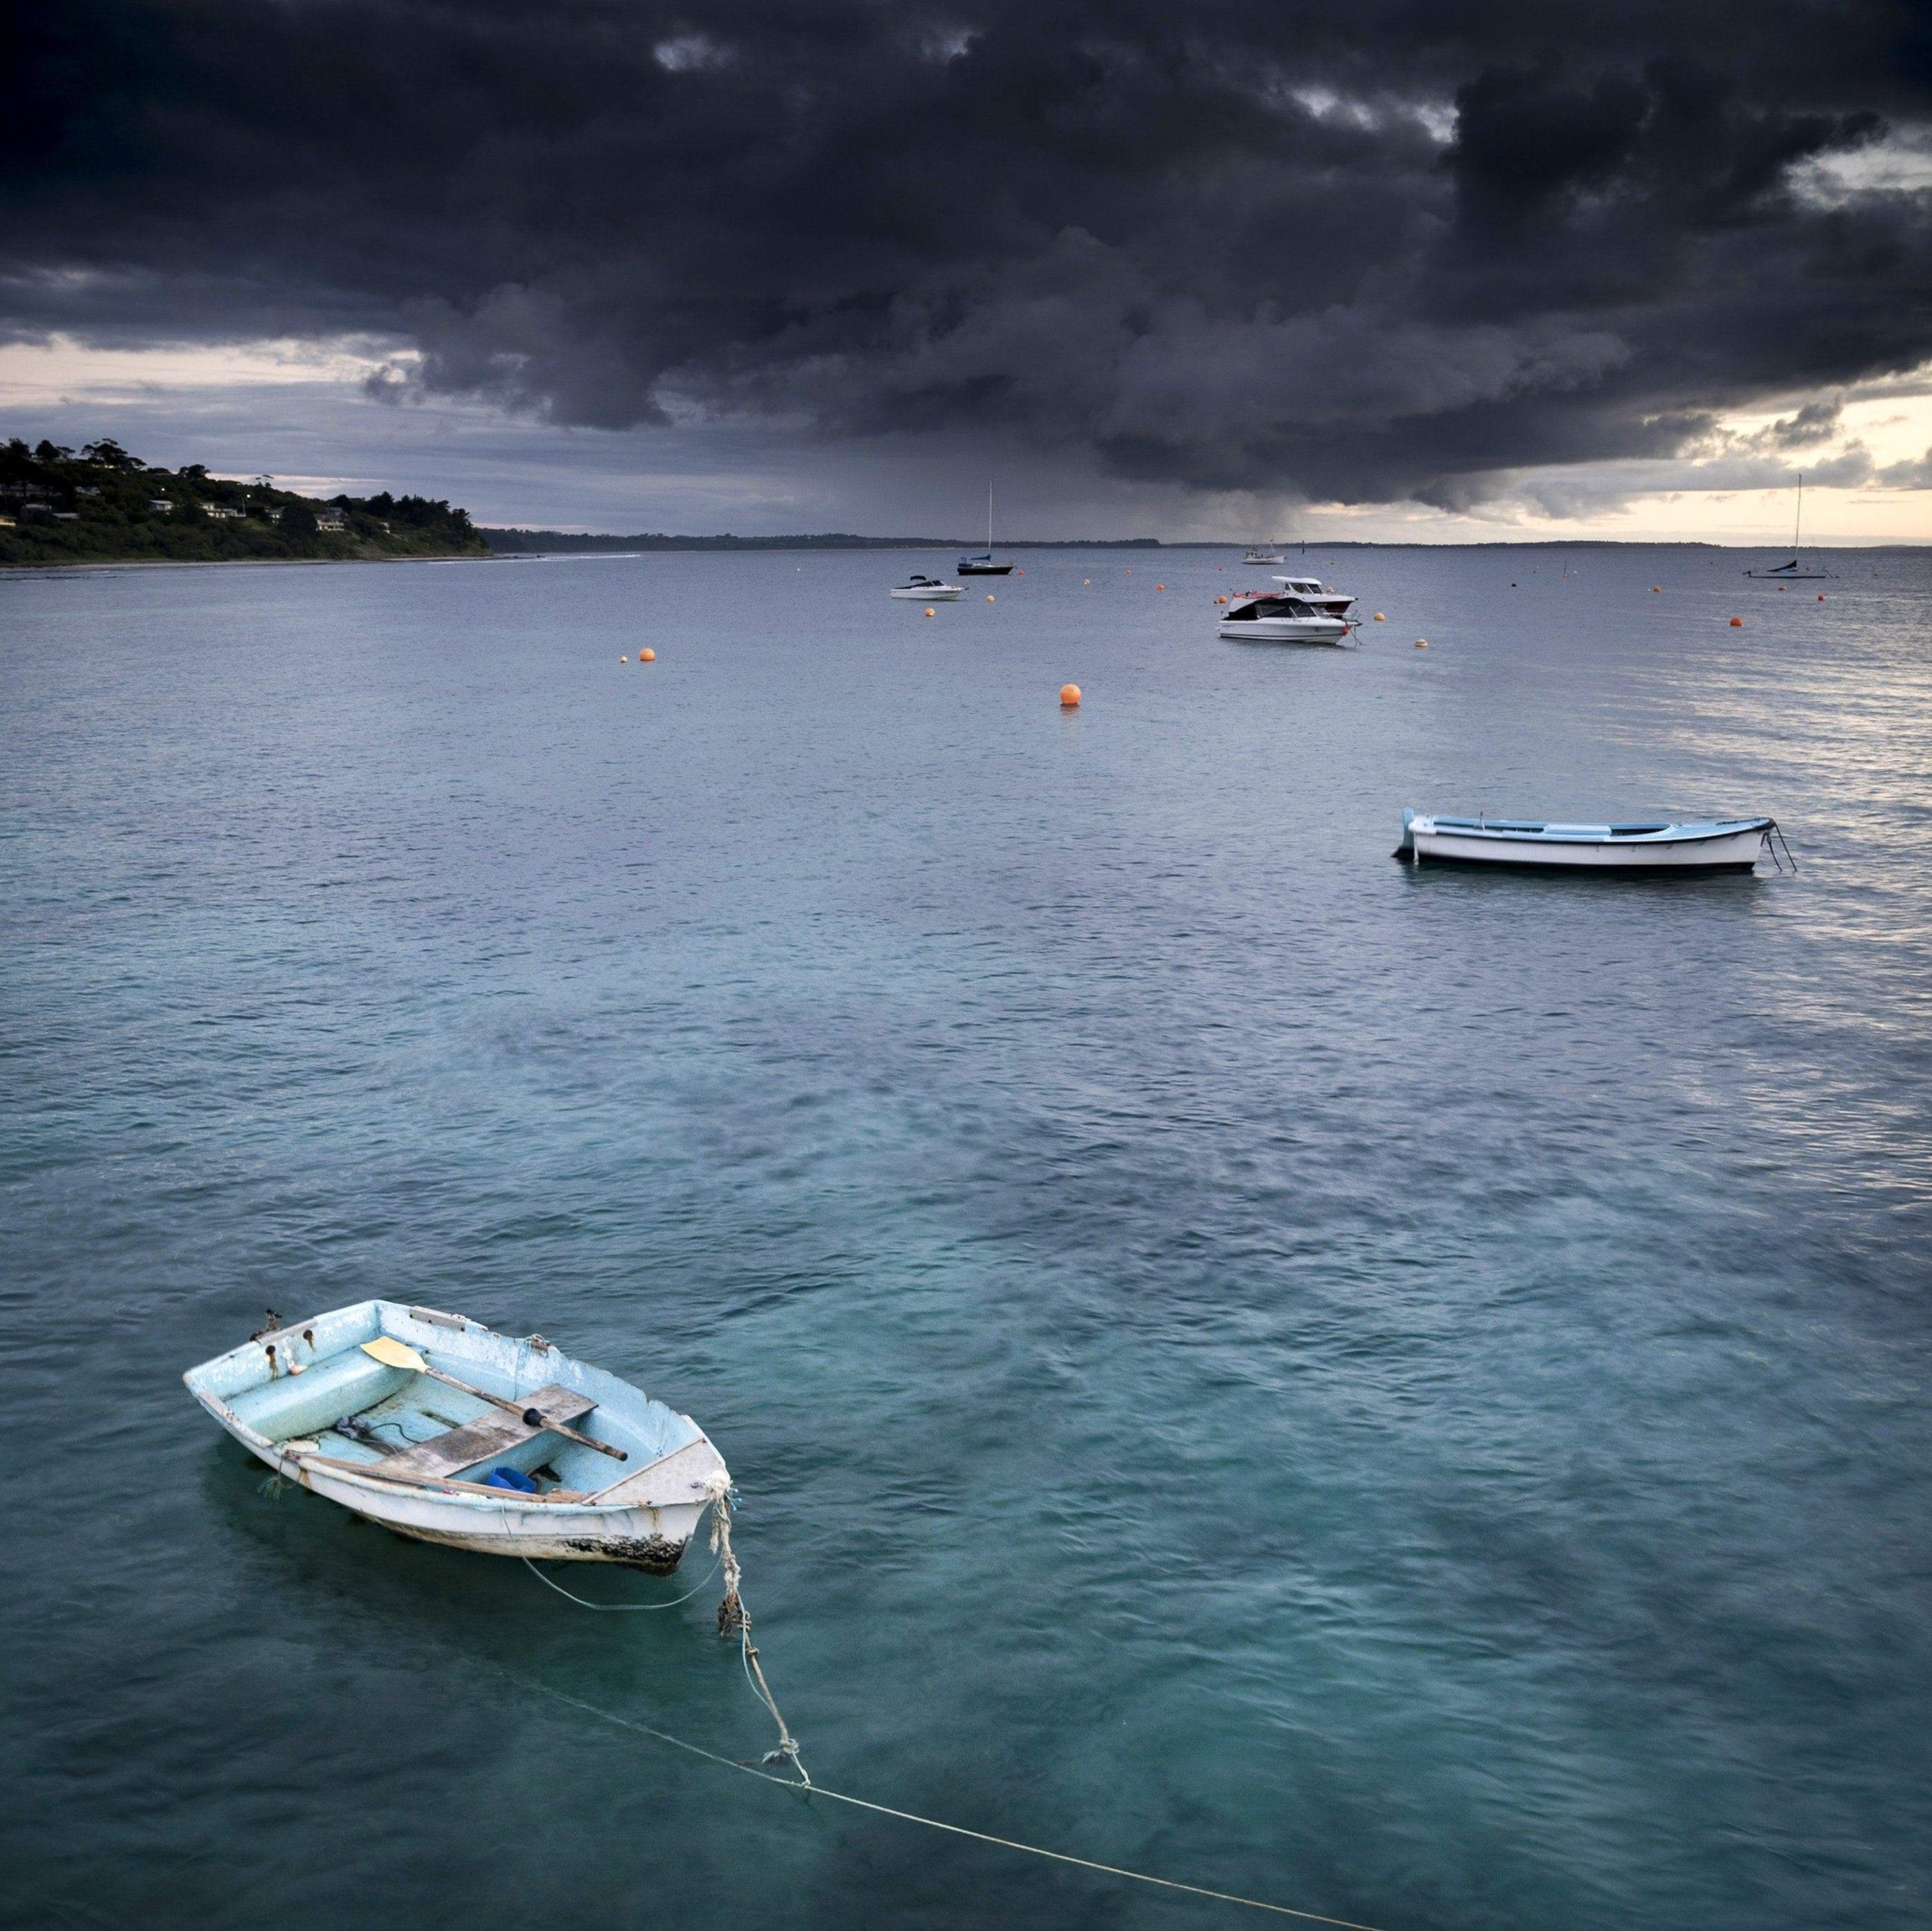 Dark clouds over a lake with some boats floating, Stormy Skies, Flinders - Mornington Peninsula VIC